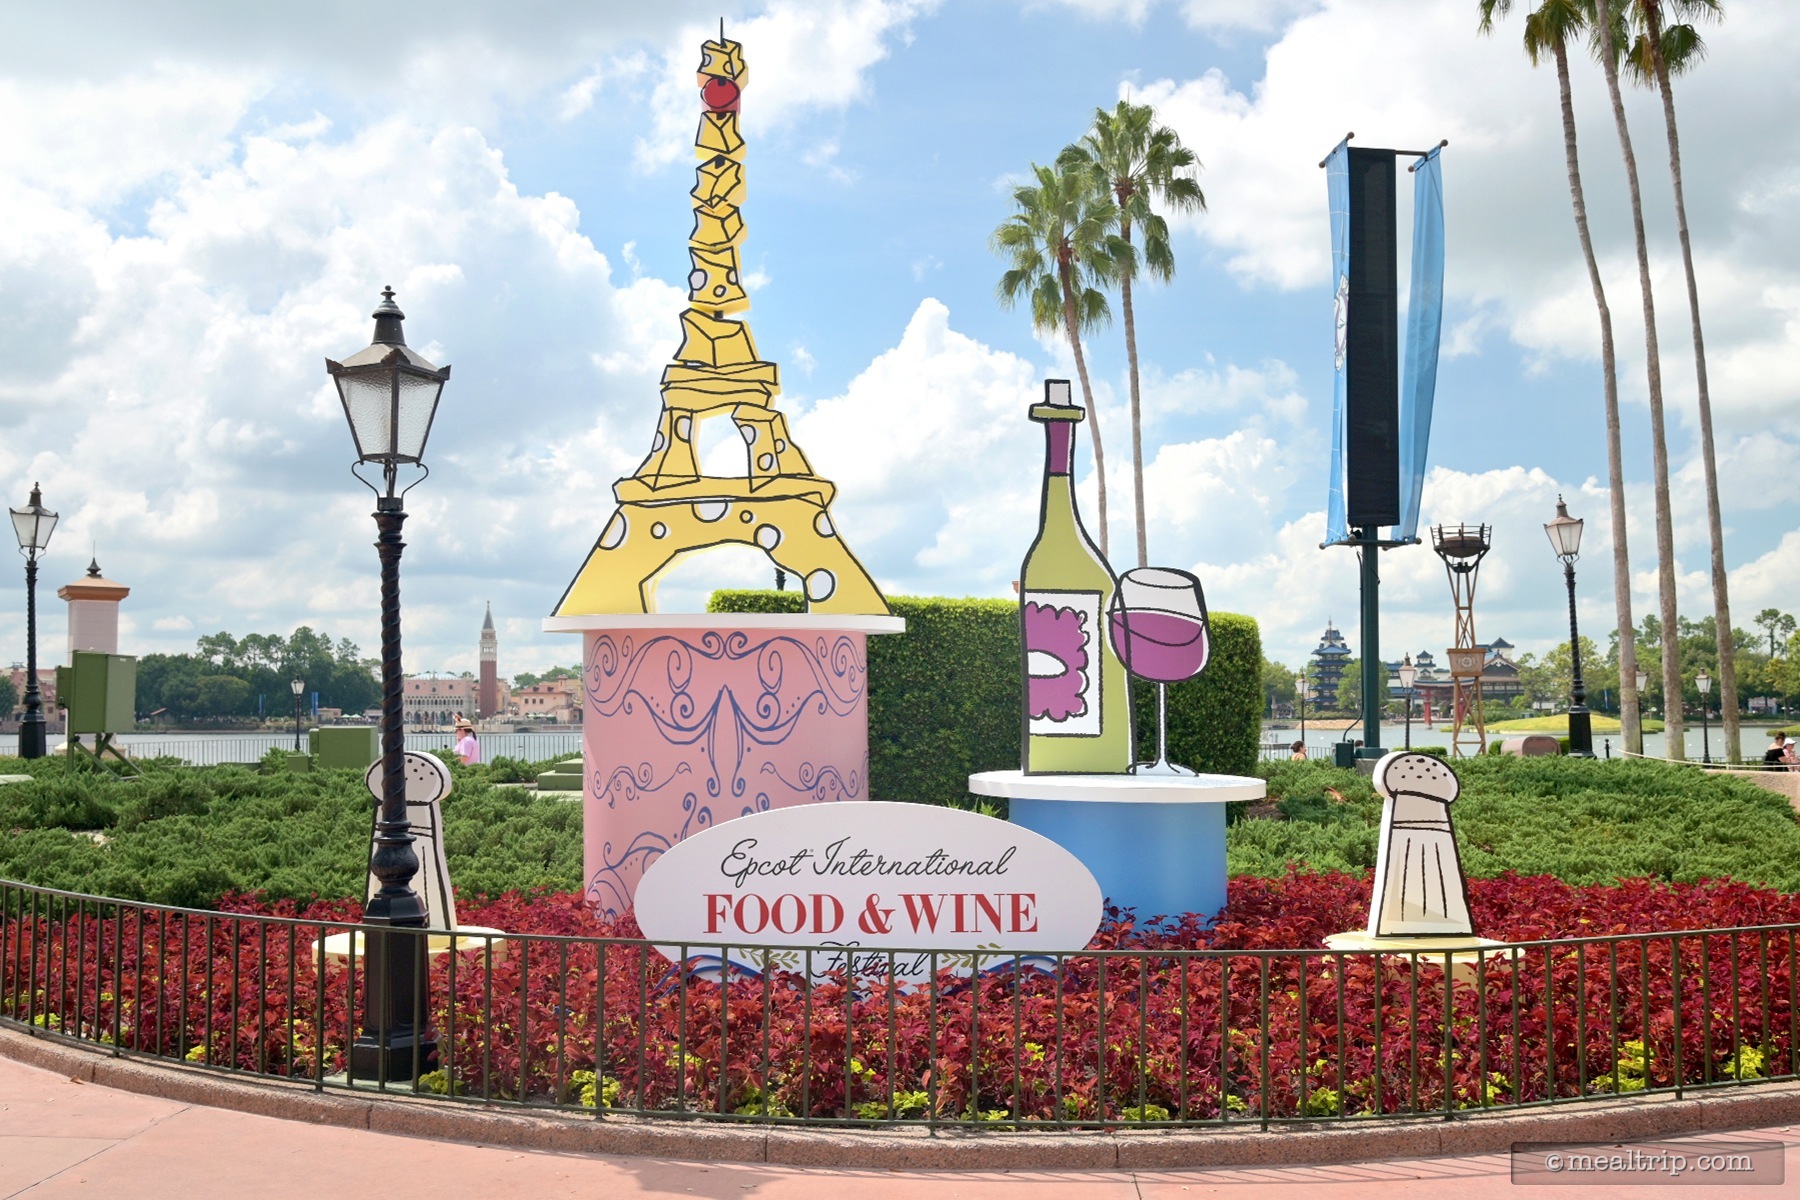 Menu Items and Booth Names for the 2020 "Taste of Epcot" — Celebrating 25 Years of the Epcot International Food and Wine Festival